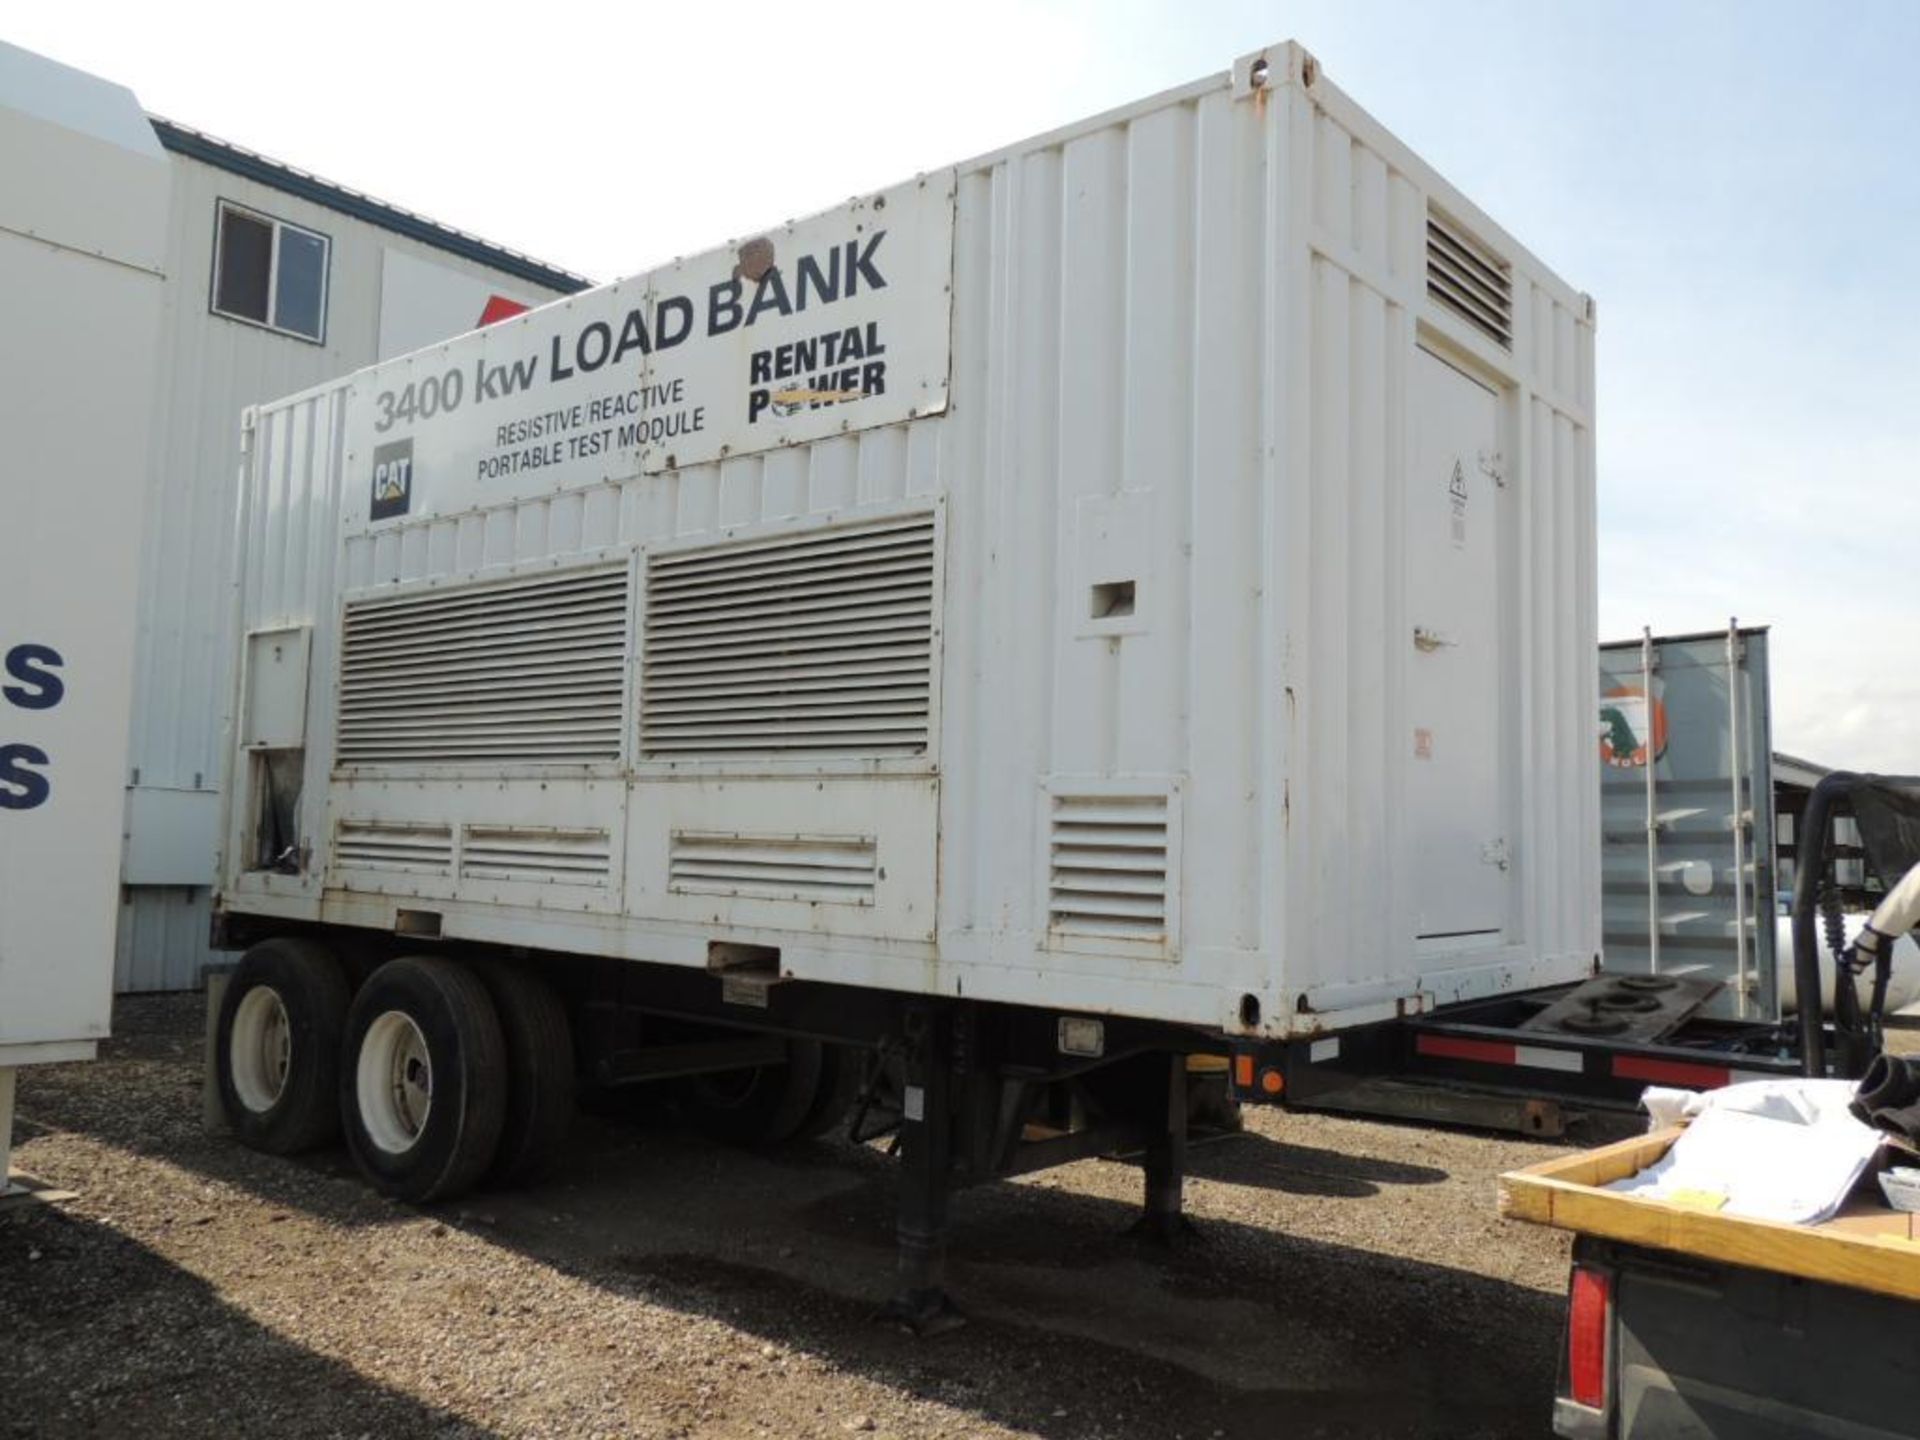 Caterpillar 3400kw Load Bank Resistive Reactive Portable Test Module, Mounted on Tandem-Axle Trailer